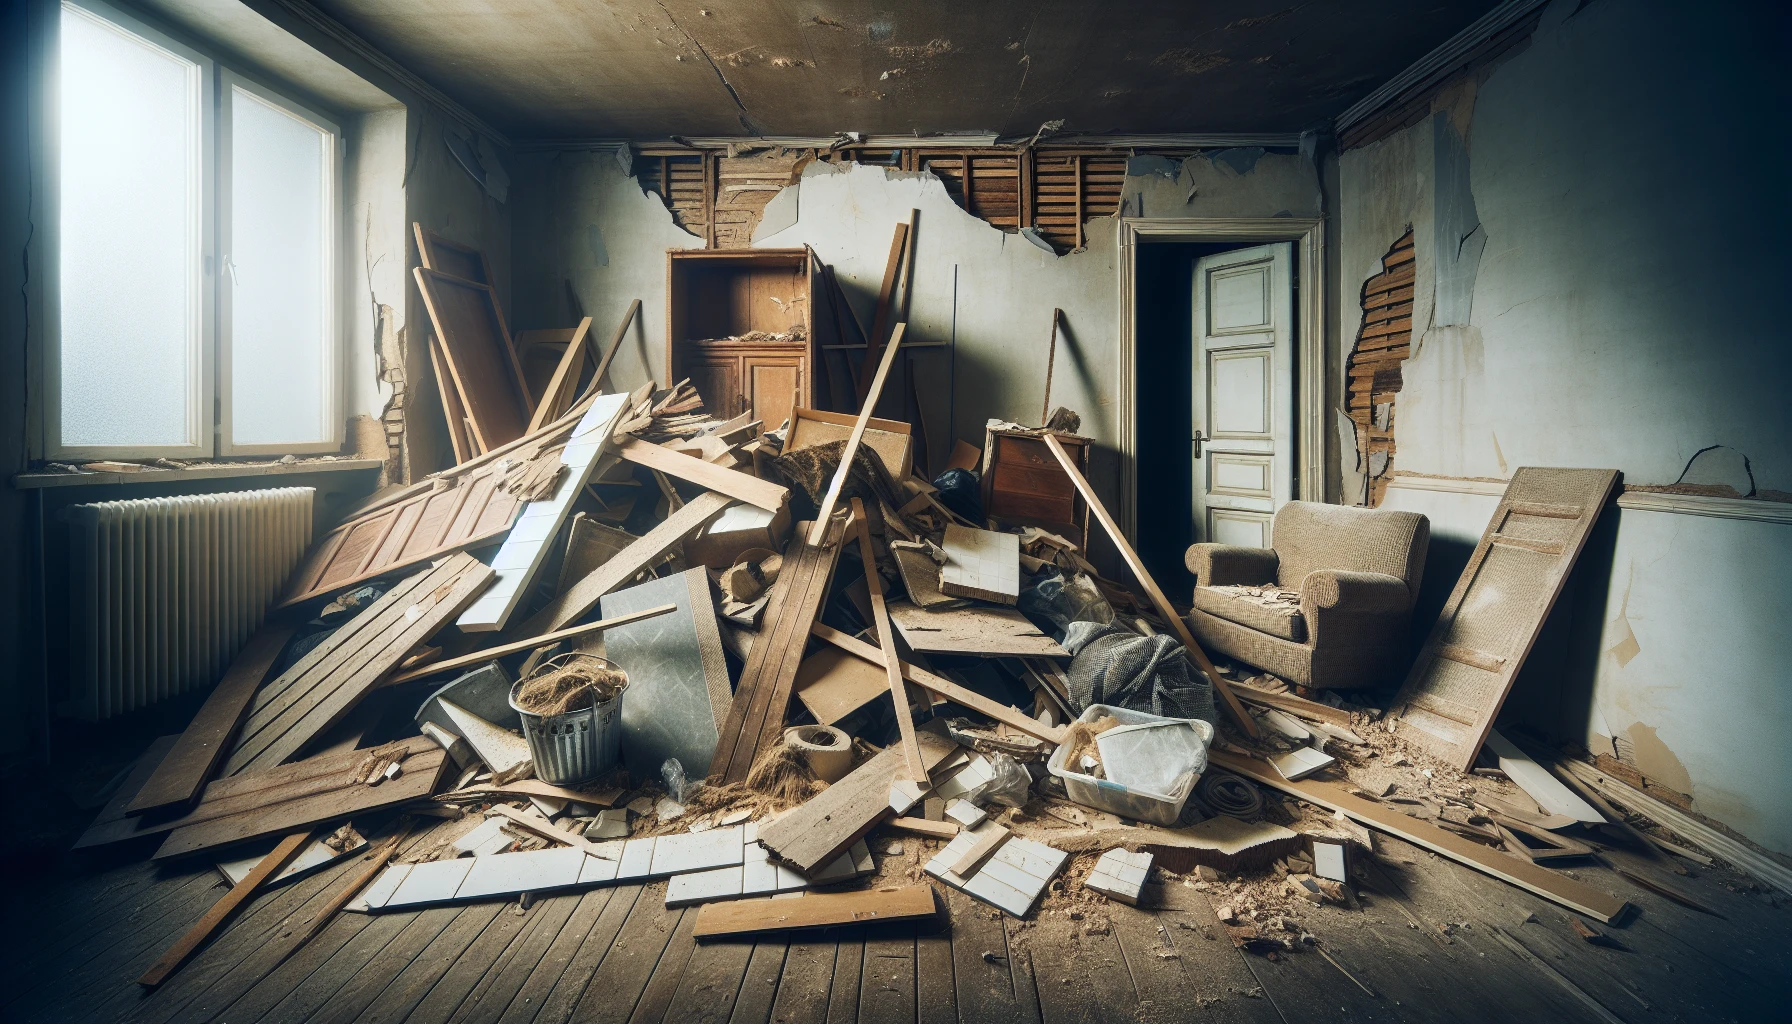 Professional junk removal services for home renovations, office cleanouts, estate cleanouts, and preparing for a move